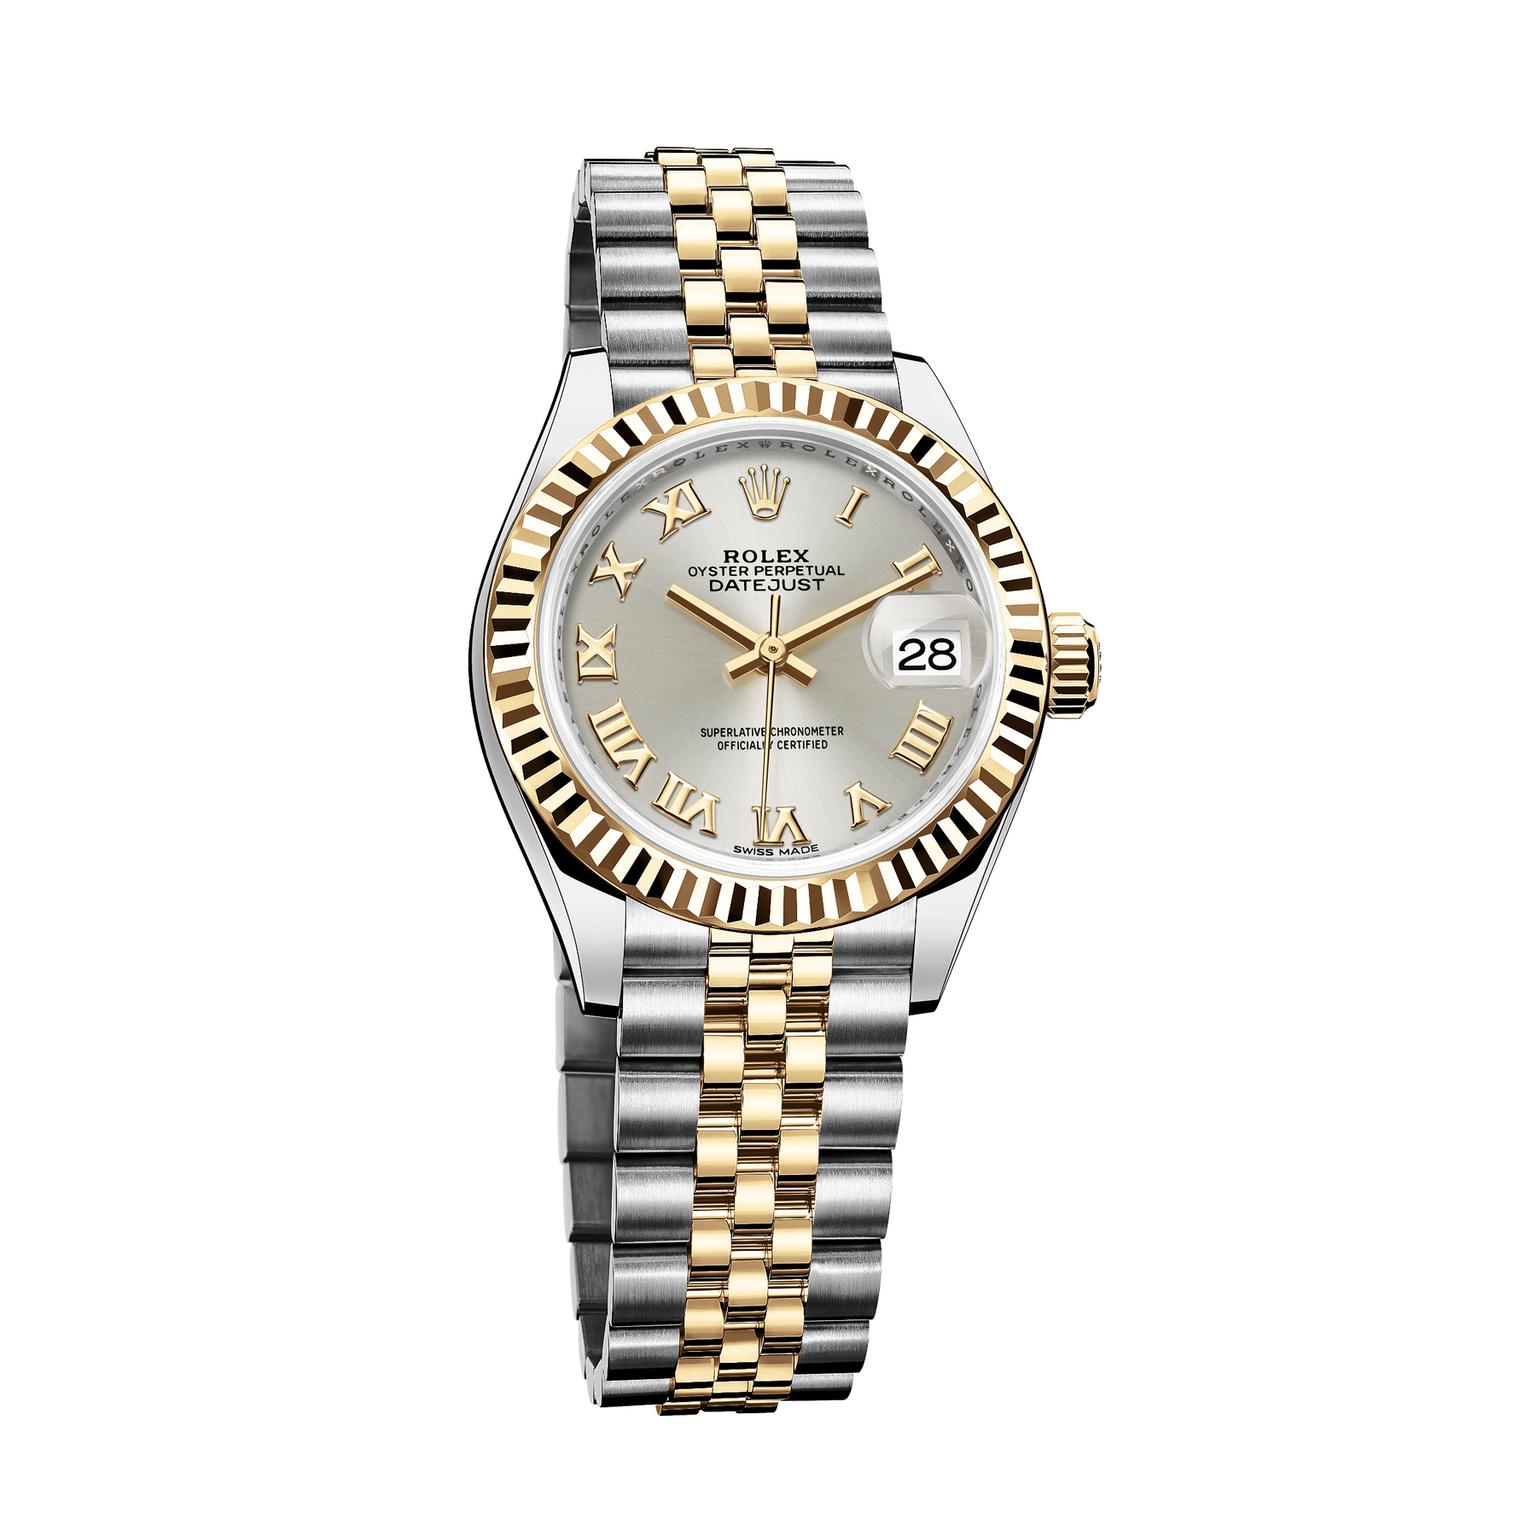 Oyster Lady-Datejust 28mm watch in Rolesor Rolex | The Jewellery Editor